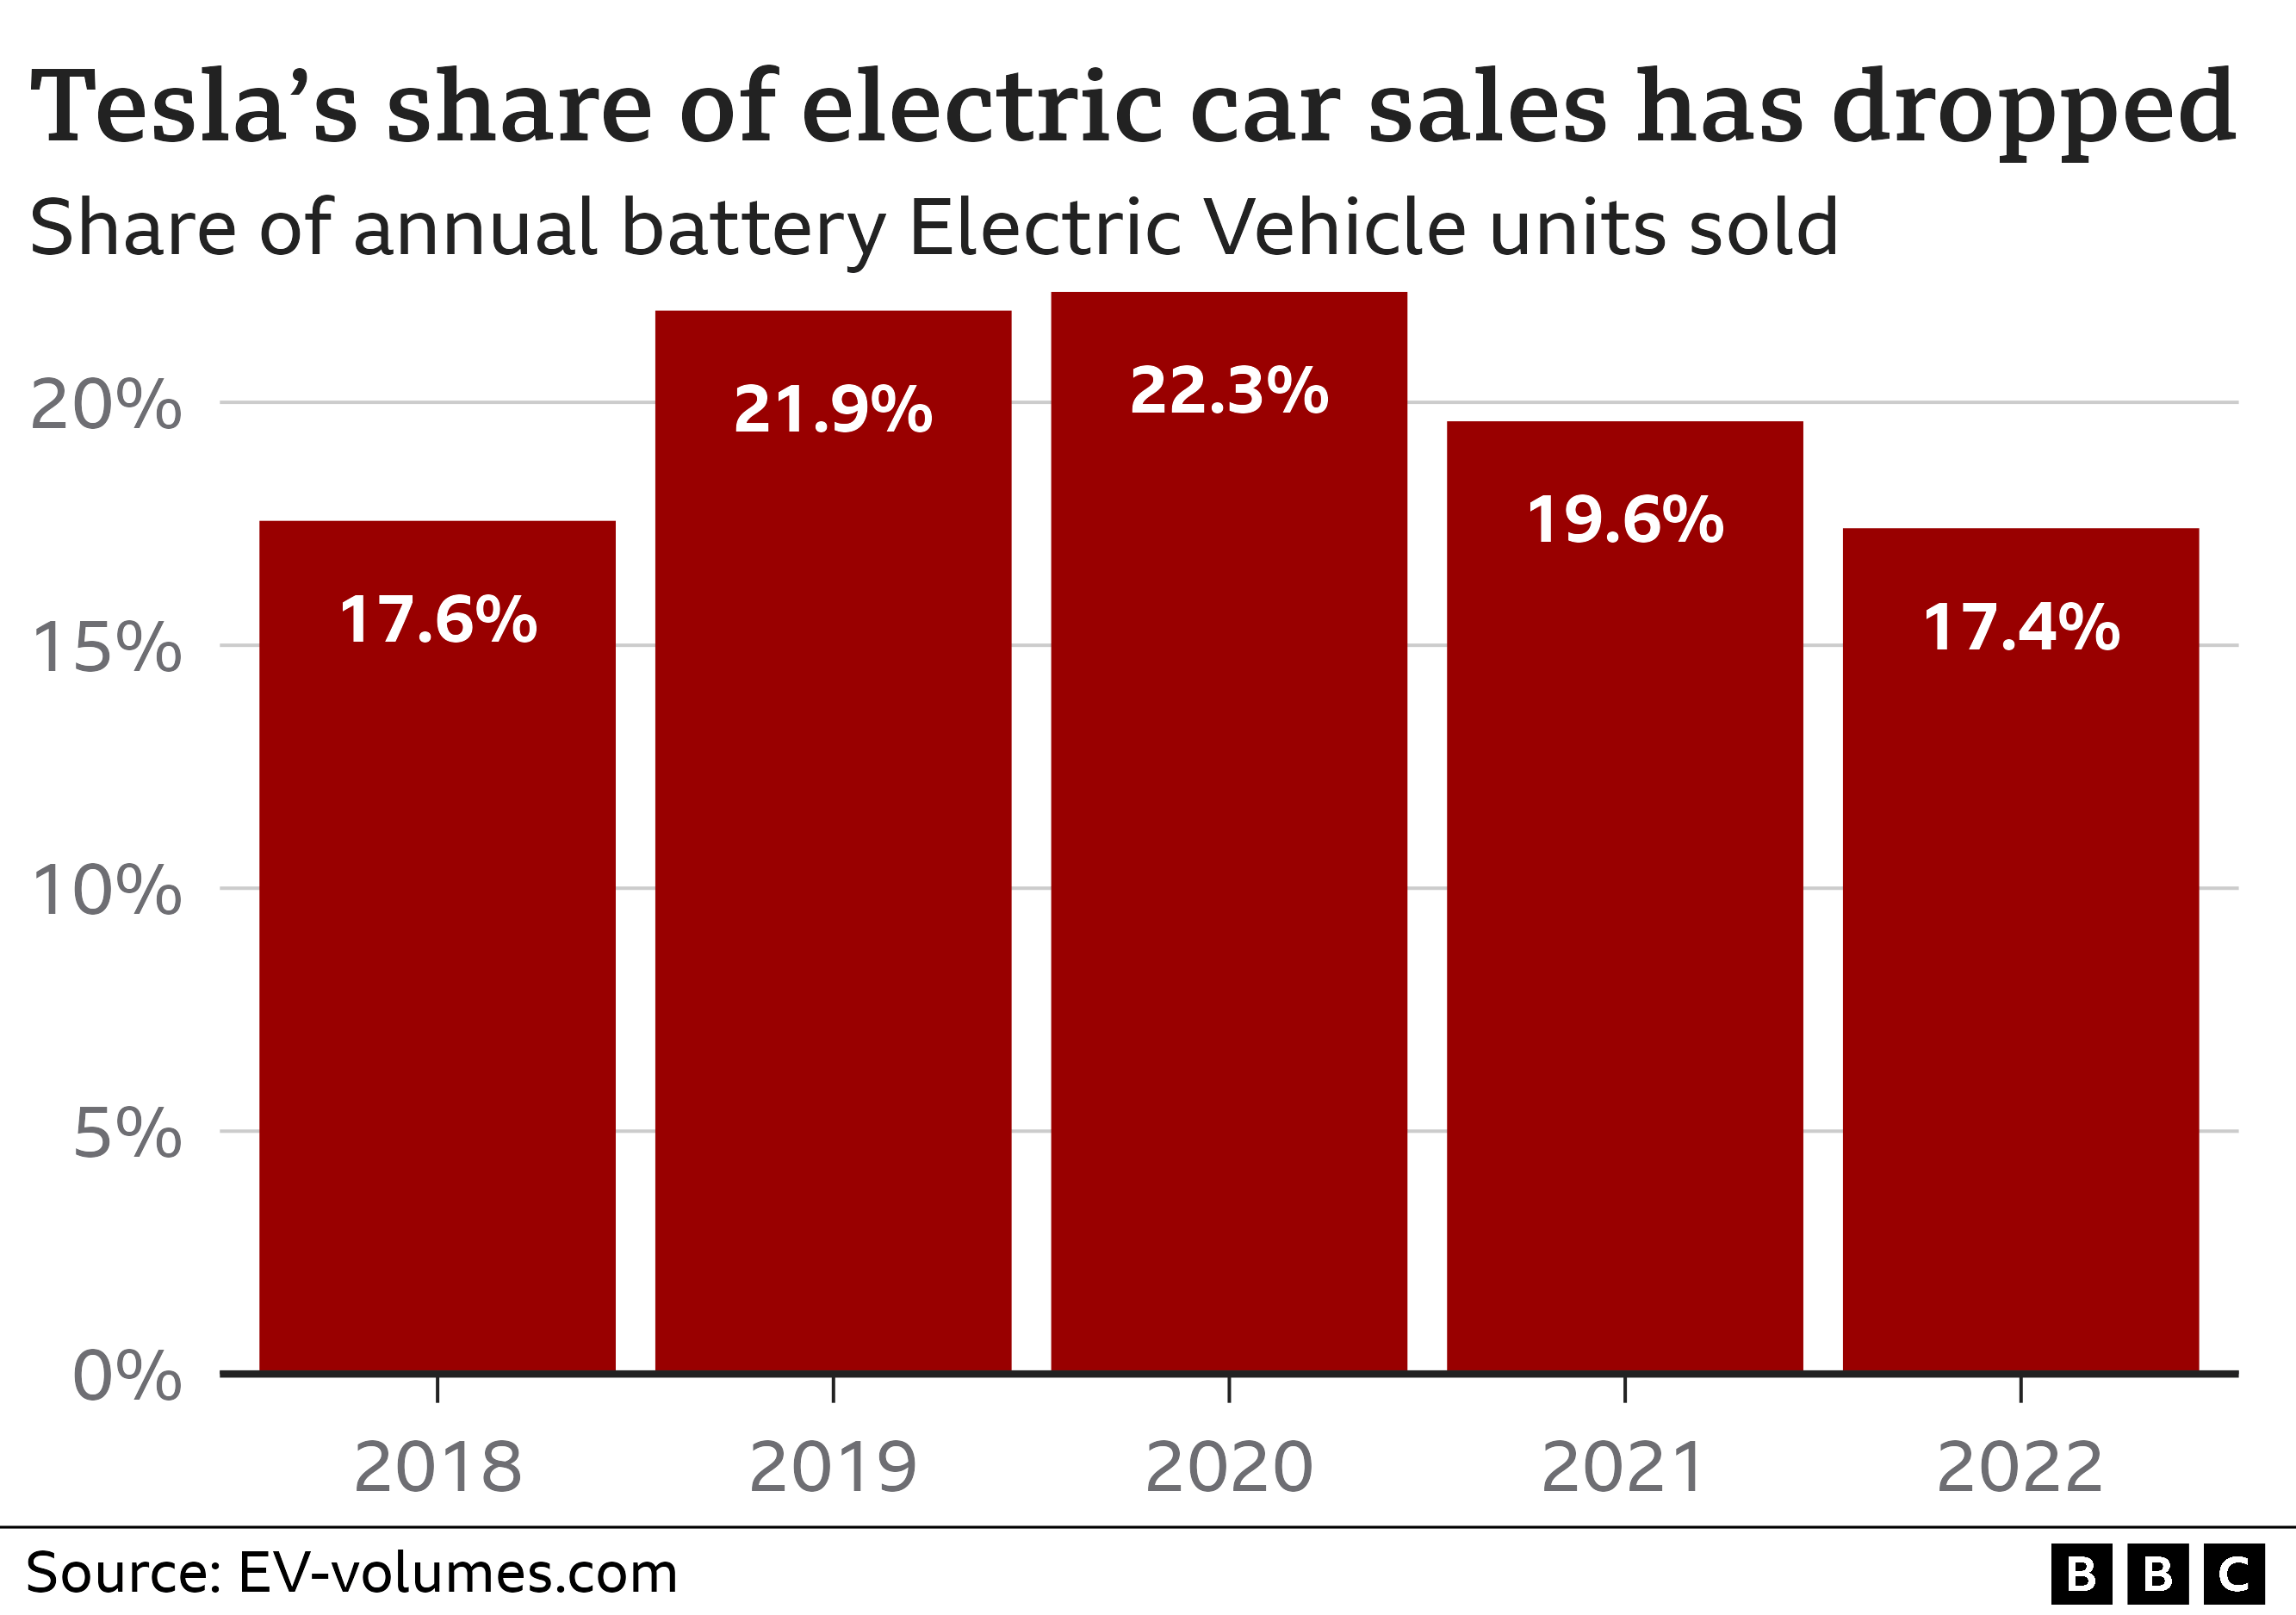 Bar chart showing Tesla's share of the Battery Electric Vehicles market declining from 22.3 percent in 2020 to 17.4 percent in 2022